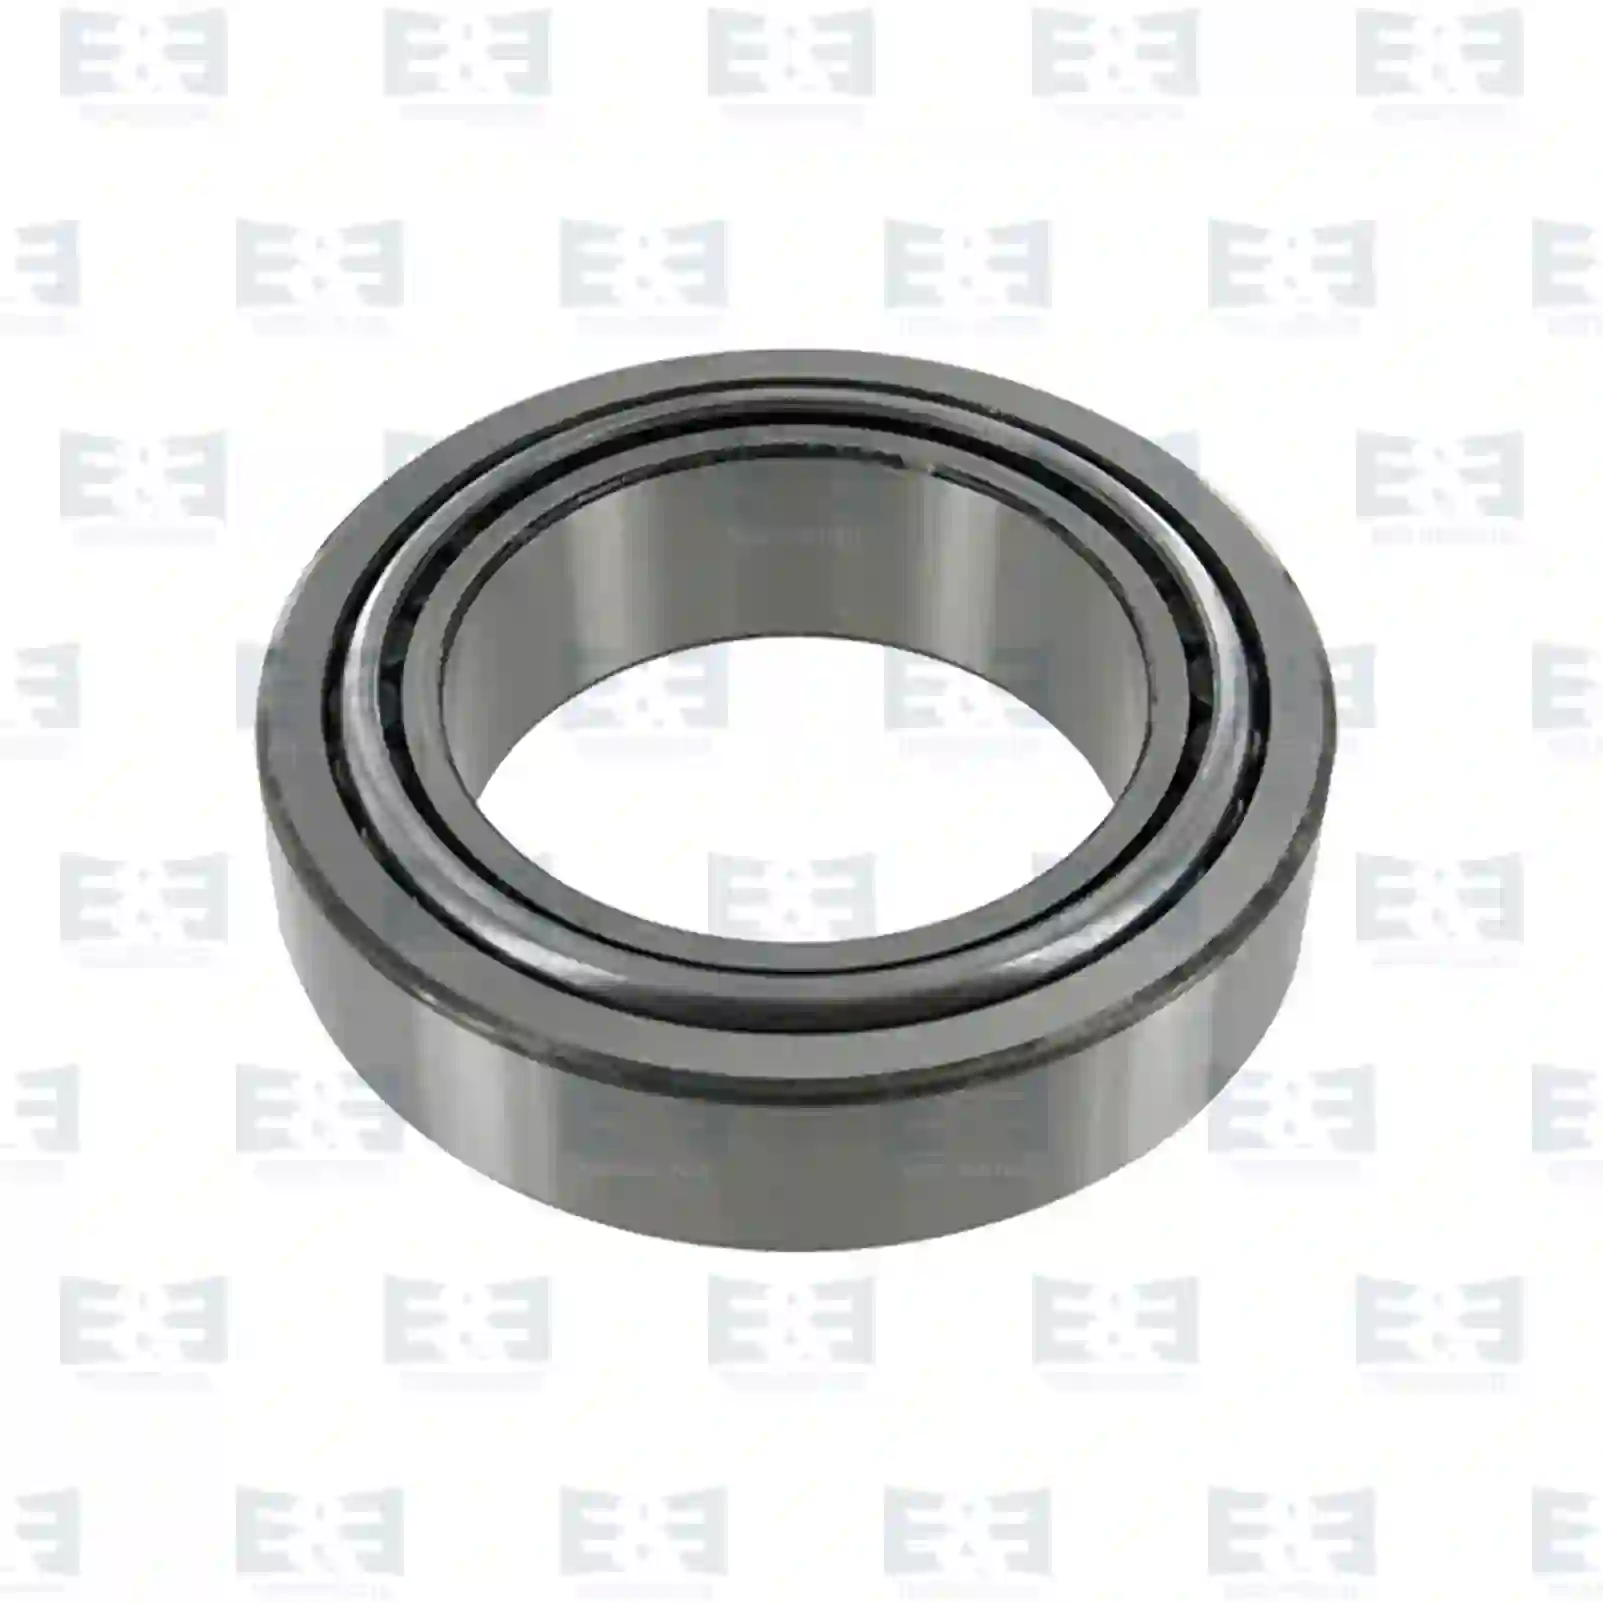 Hub Tapered roller bearing, EE No 2E2284523 ,  oem no:01133049, 1133049, 06324990058, 5000350029, 5000685838, 5010439171, 5516010498, 183667, 183767, ZG03034-0008 E&E Truck Spare Parts | Truck Spare Parts, Auotomotive Spare Parts